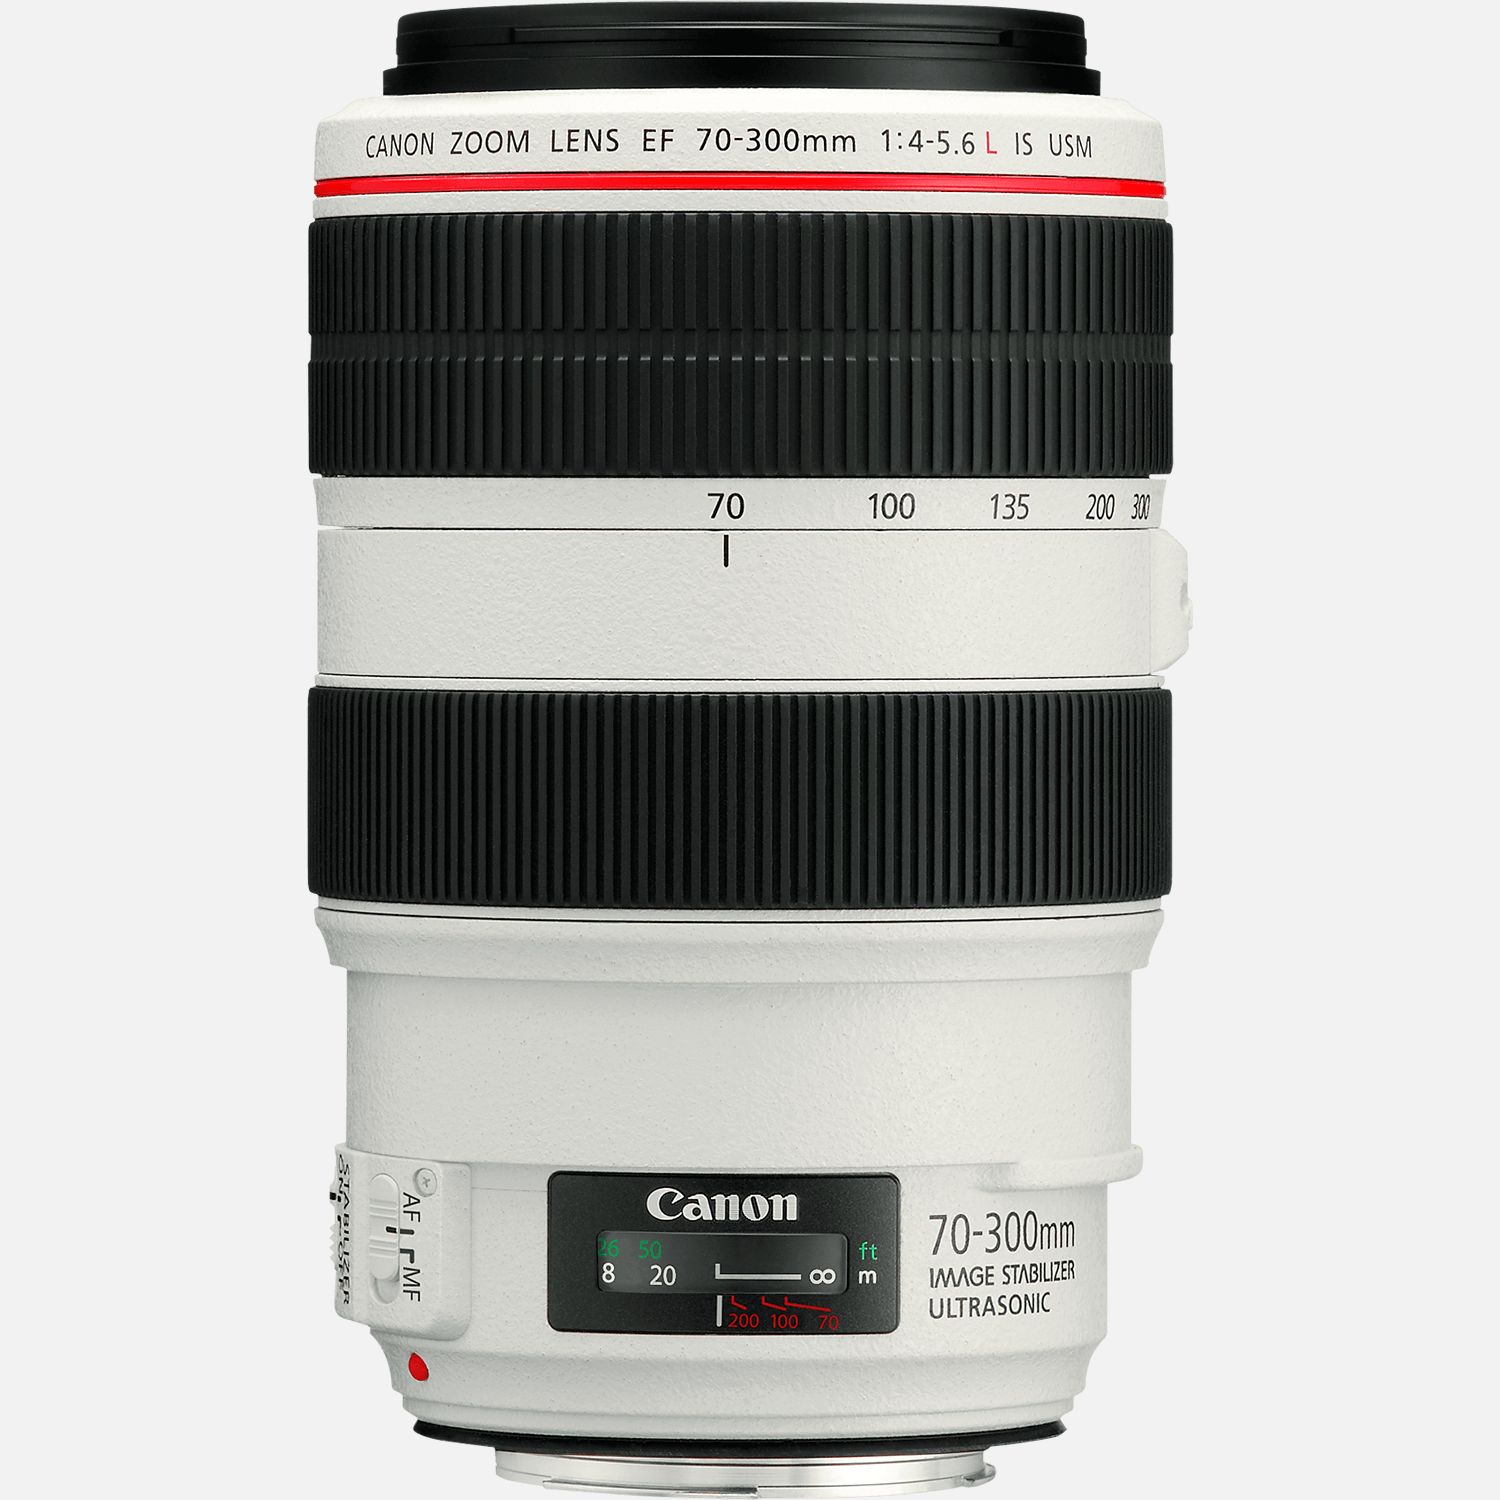 Canon EF 70-300mm f/4-5.6L IS USM Lens in Discontinued at Canon